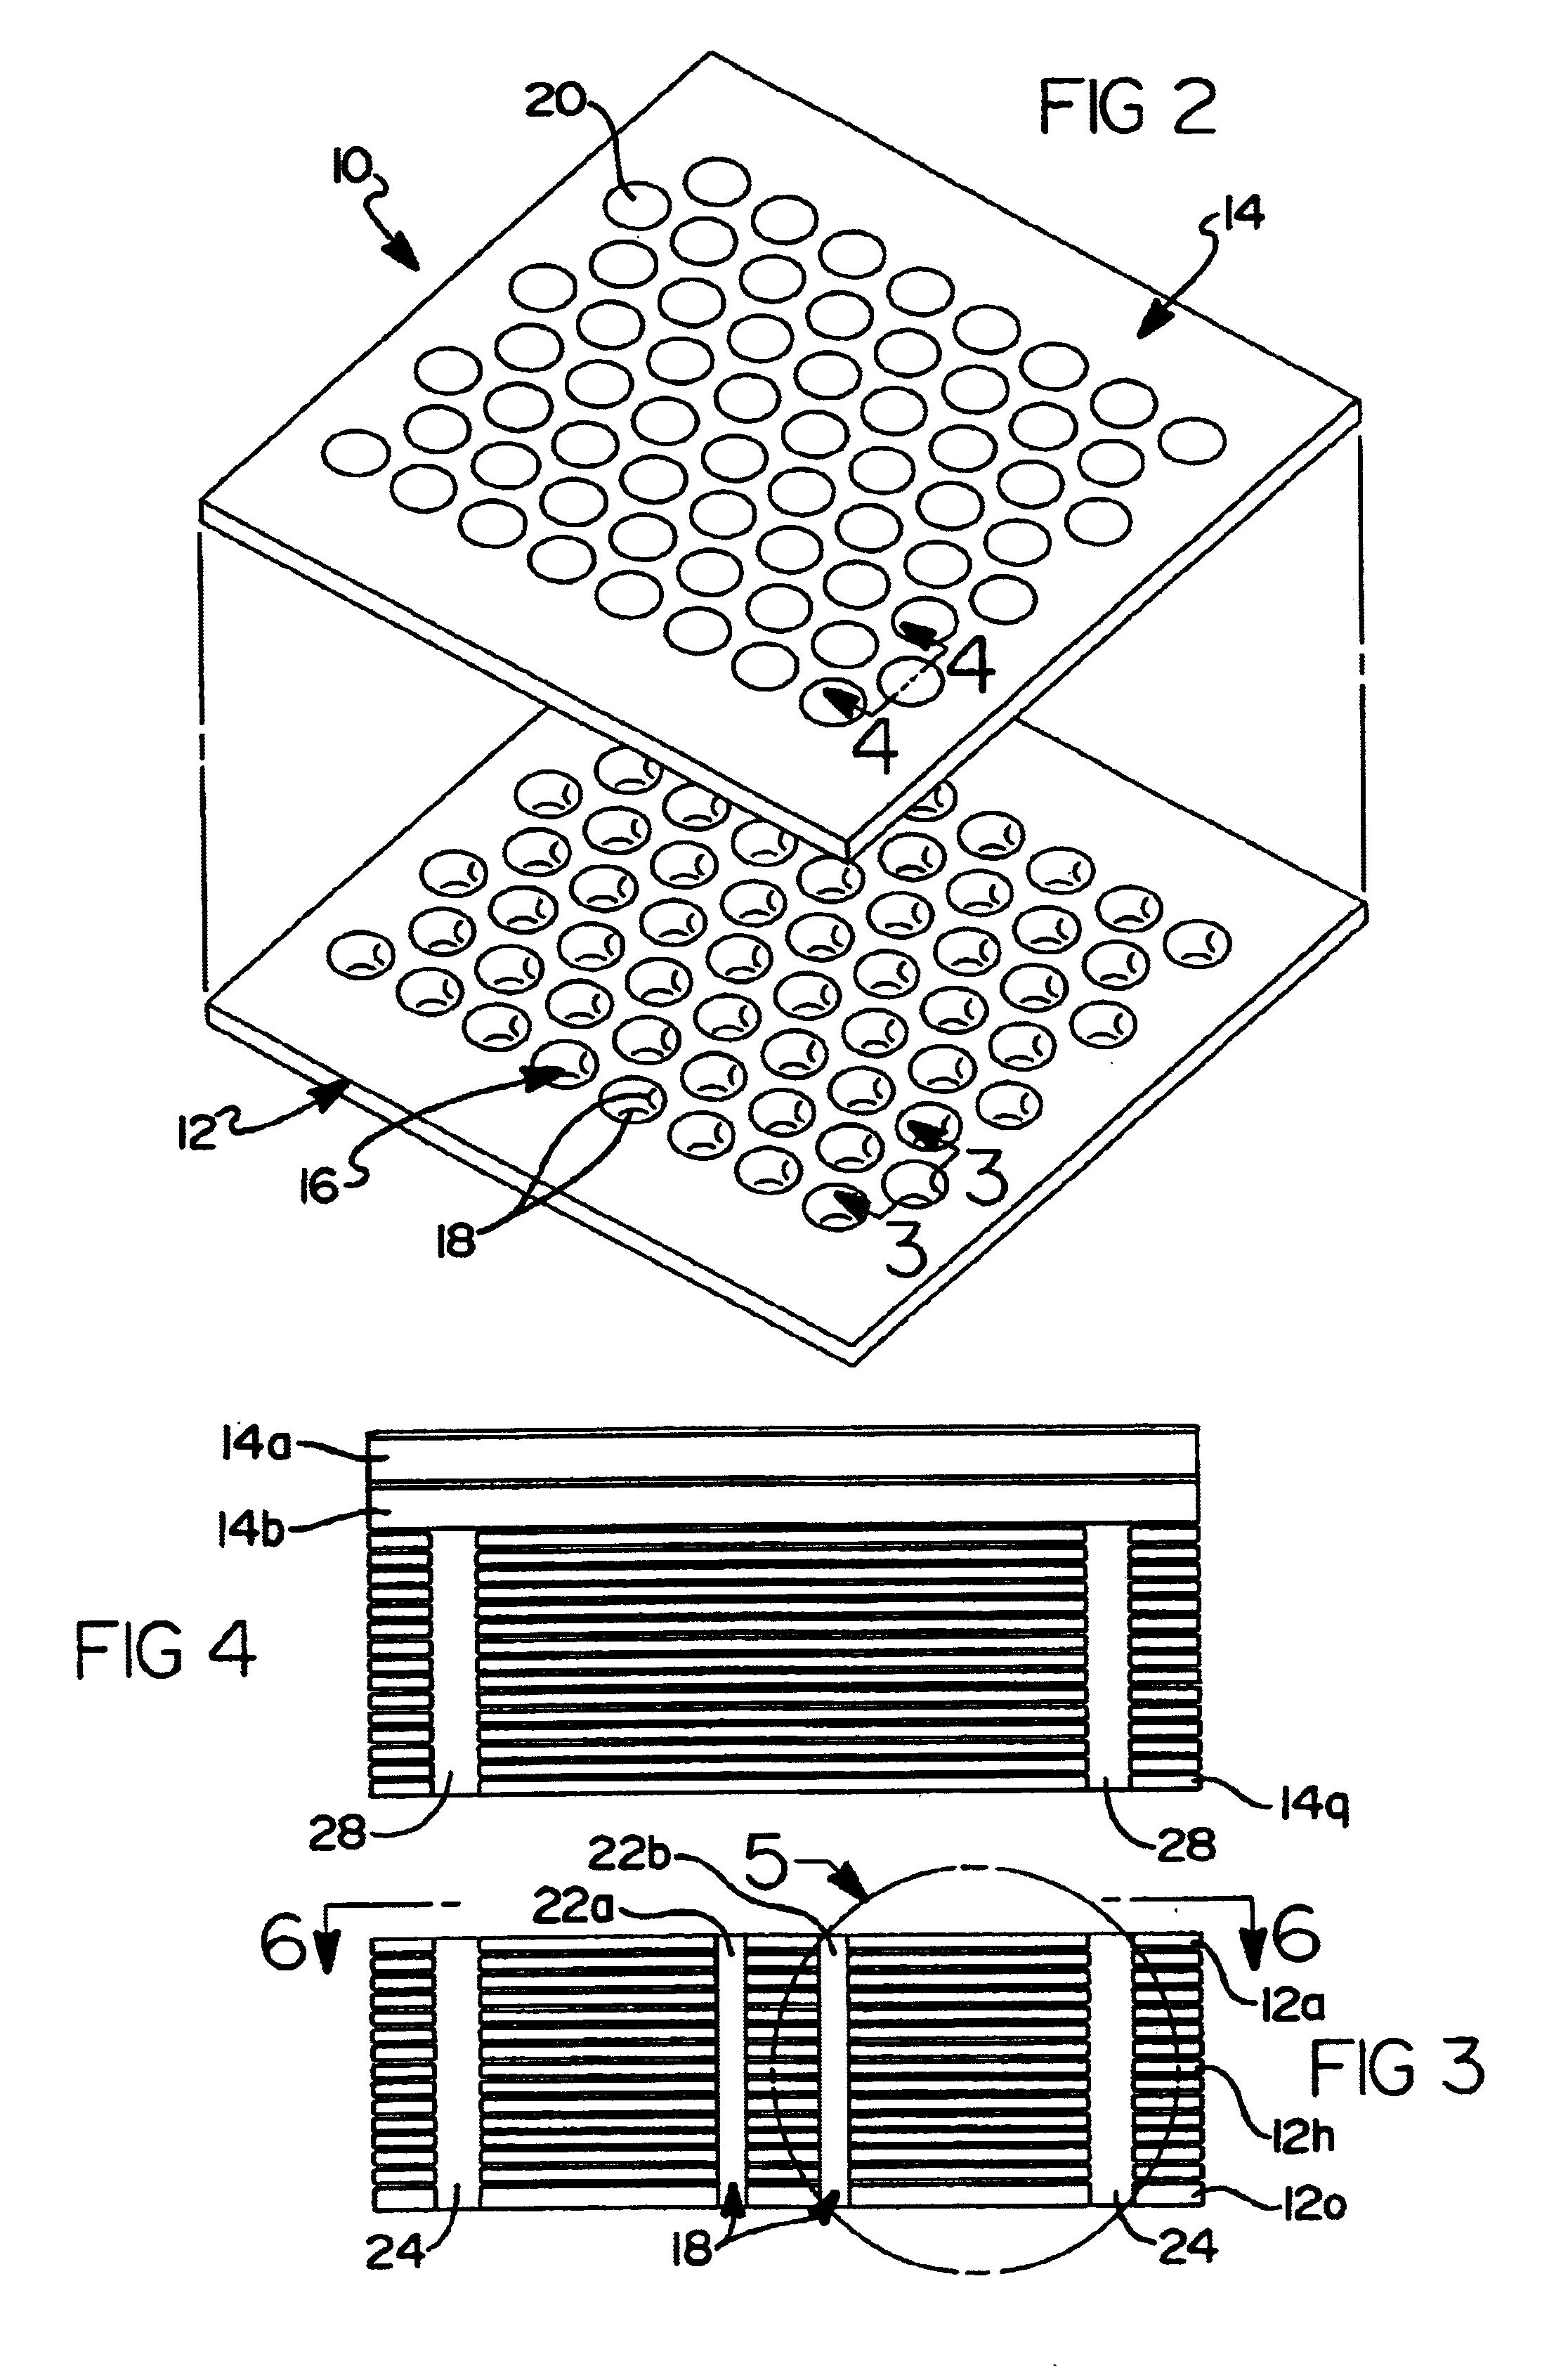 Antenna-integrated printed wiring board assembly for a phased array antenna system